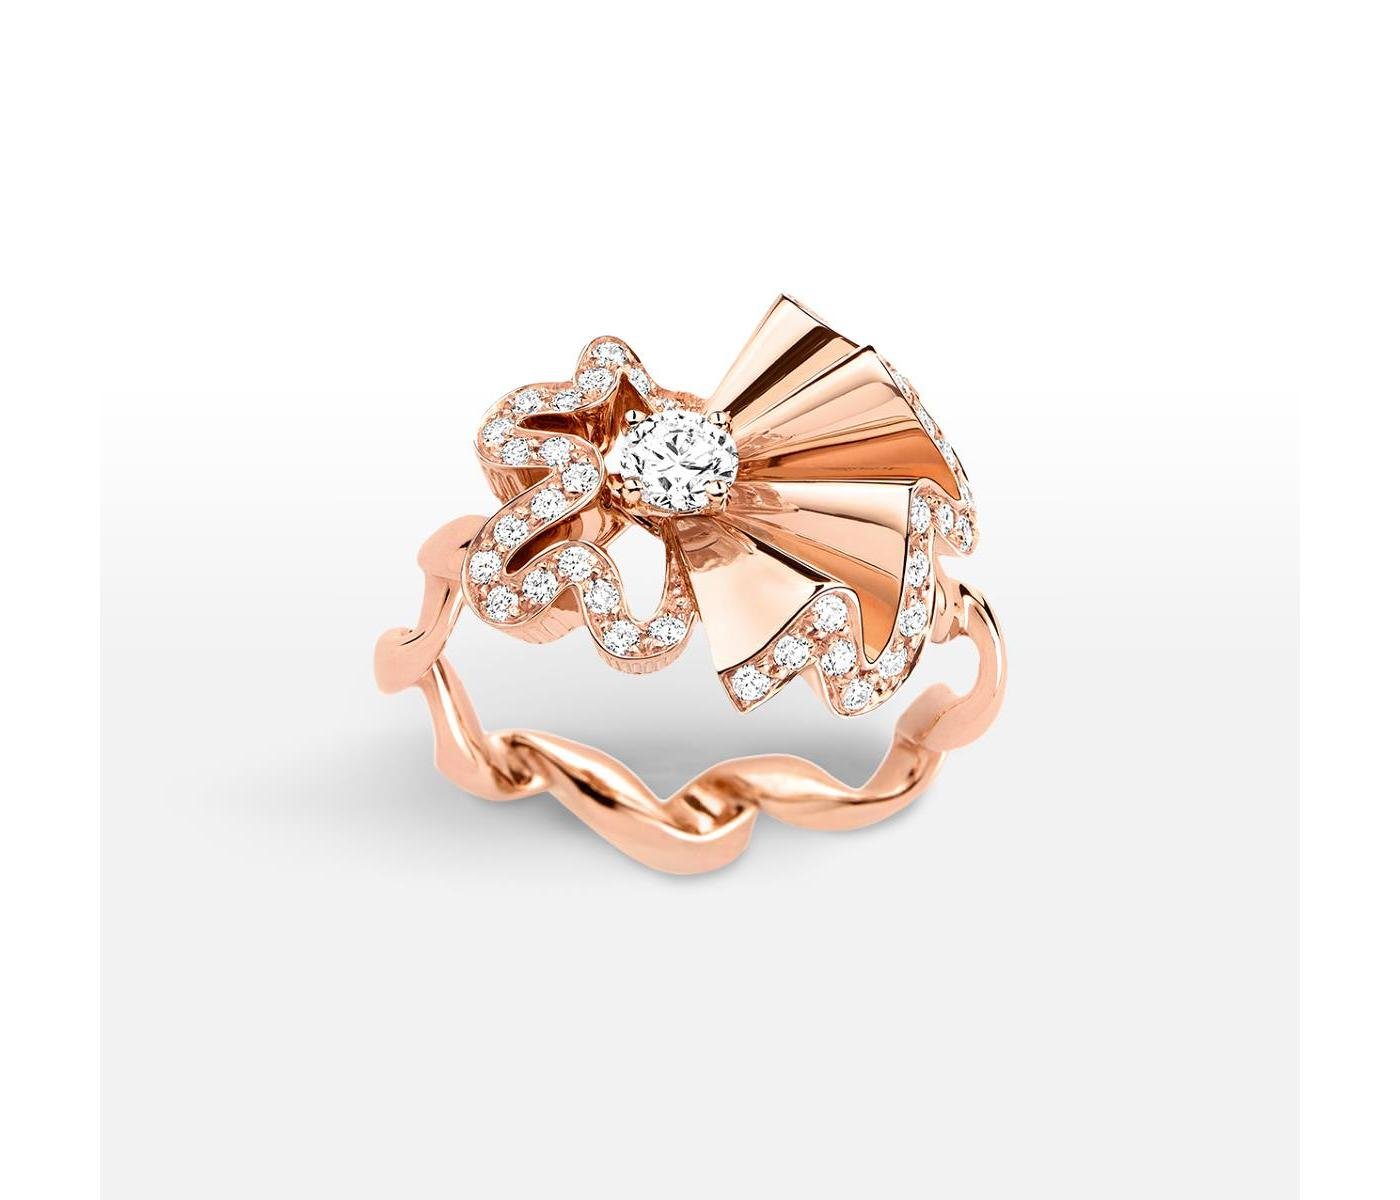 Ring by Dior